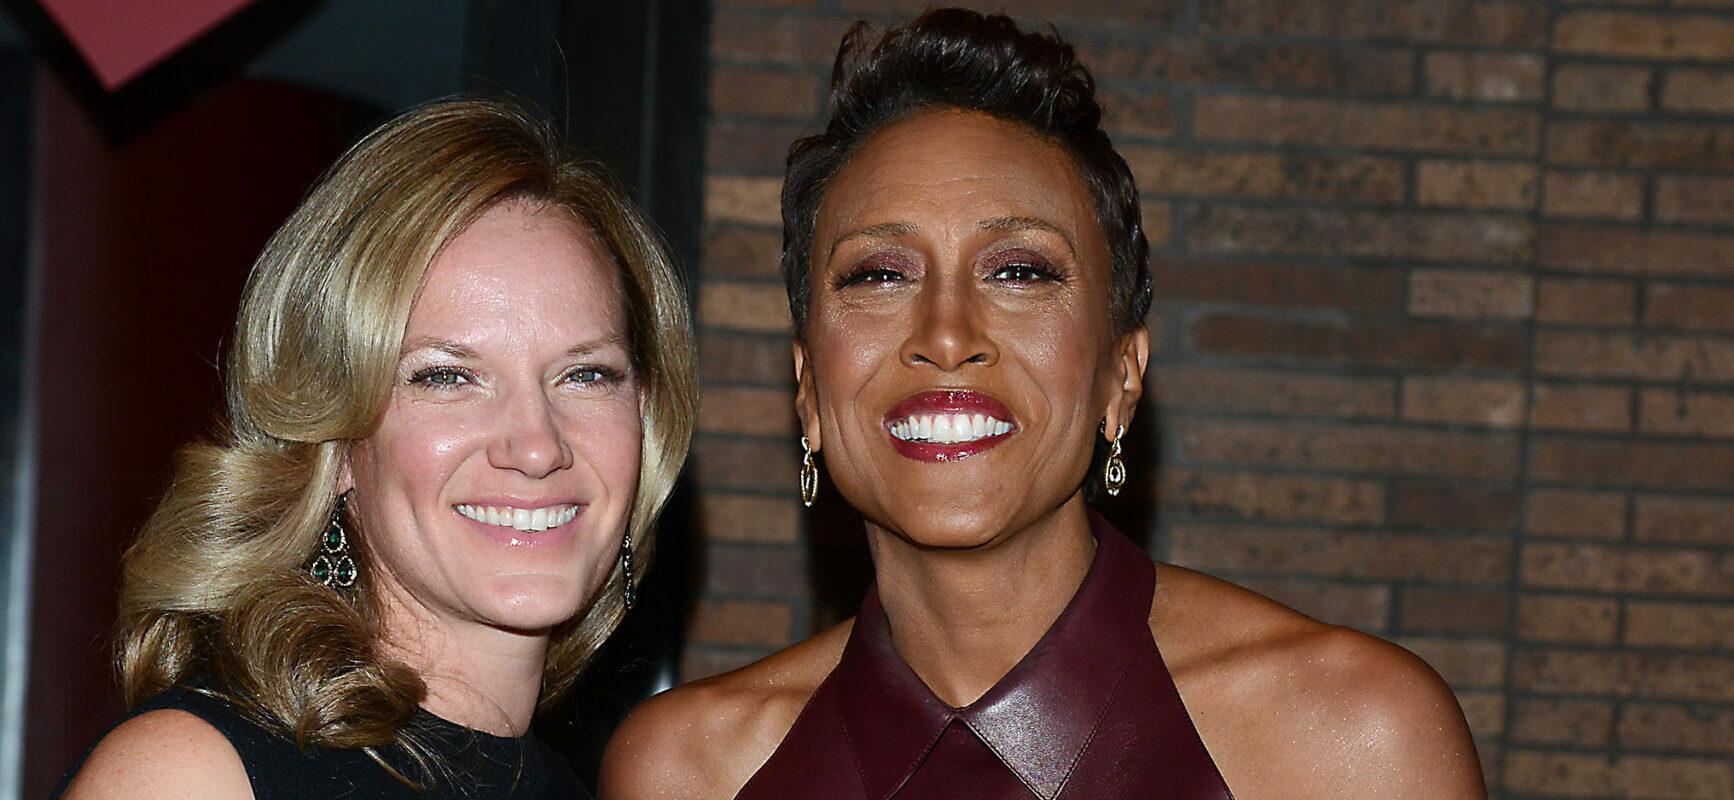 ‘GMA’ Host Robin Roberts Follows Through On ‘Saying Yes To Marriage’ With Amber Laign